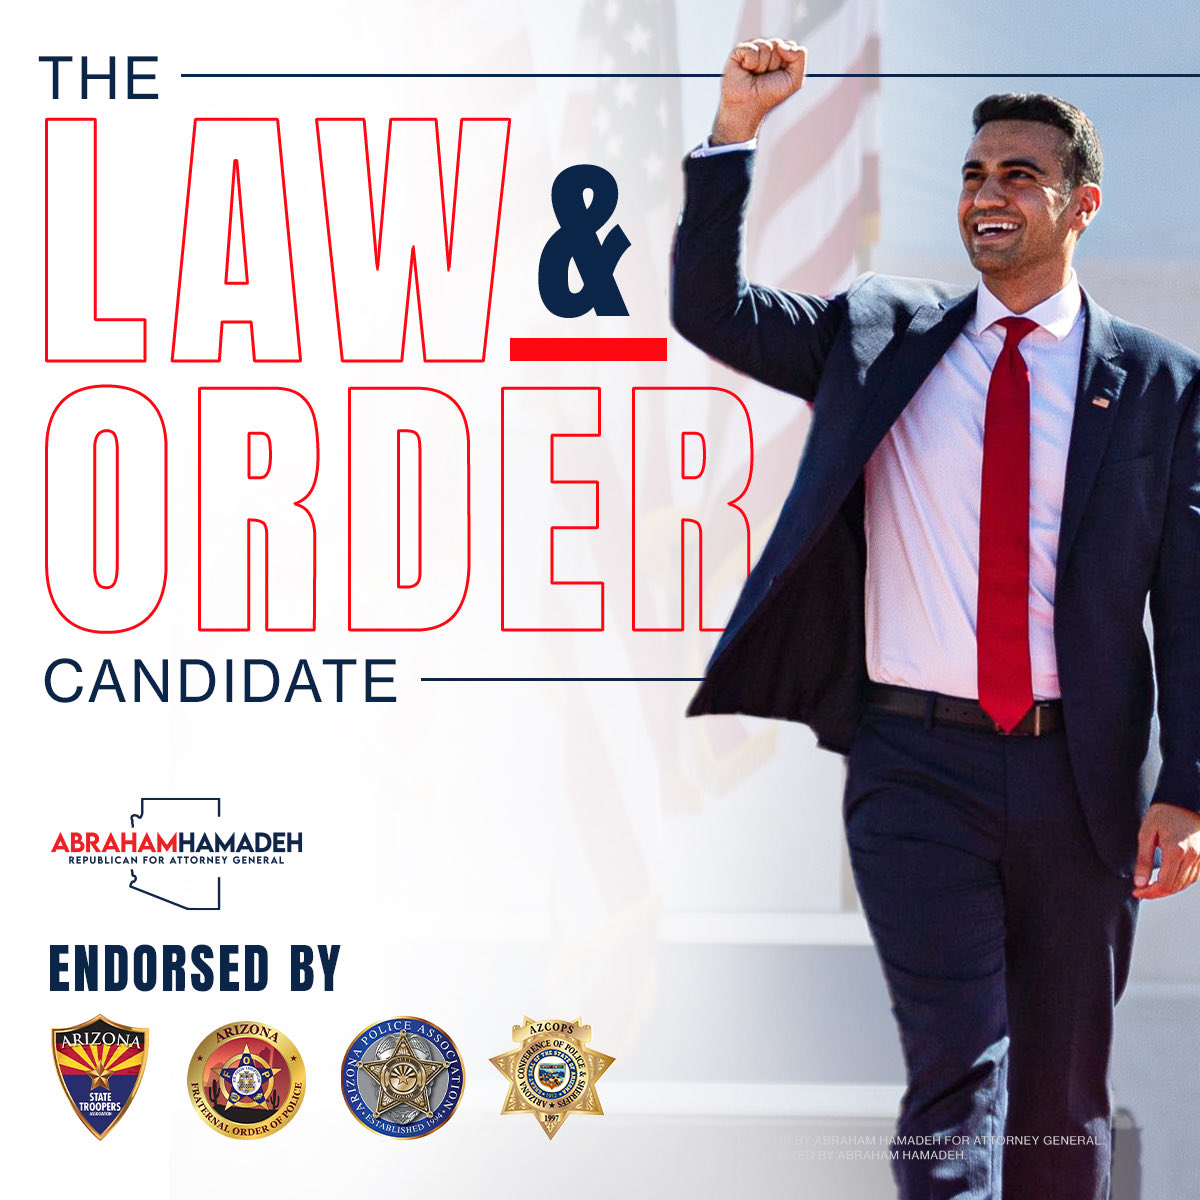 Proud to be endorsed by ALL law enforcement in Arizona!